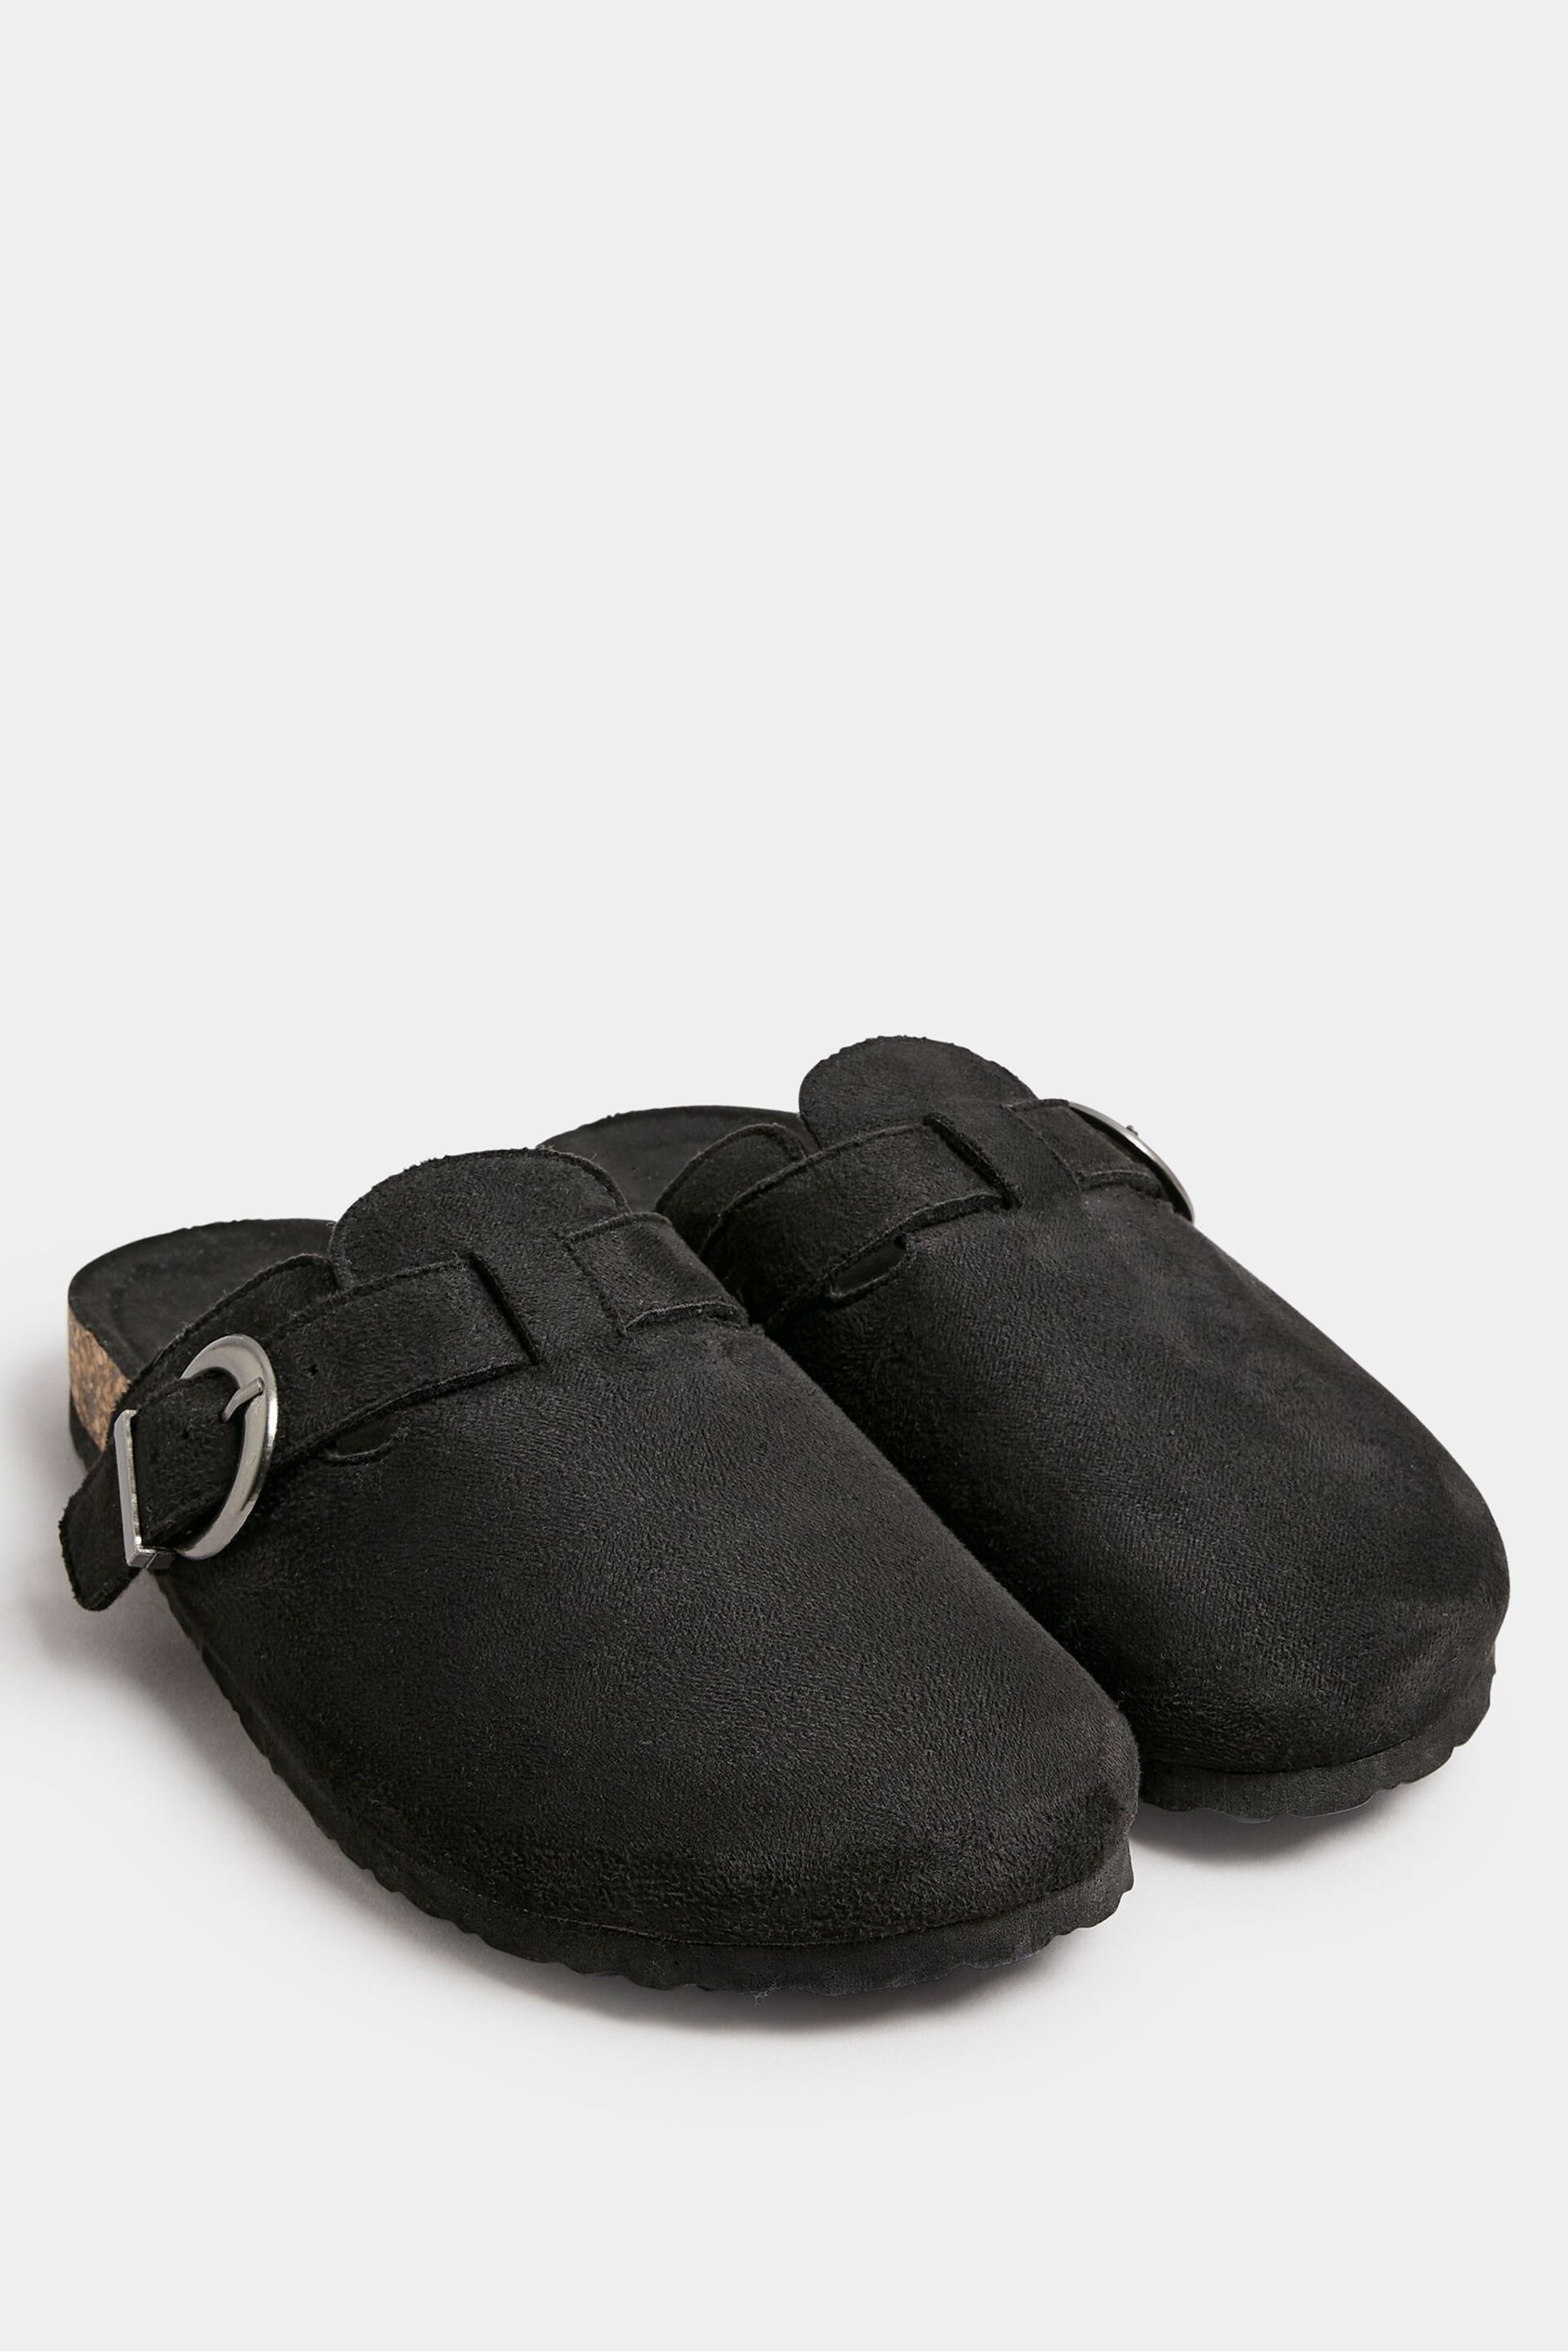 Yours Curve Black Faux Suede Clogs In Extra Wide EEE Fit - Image 1 of 5